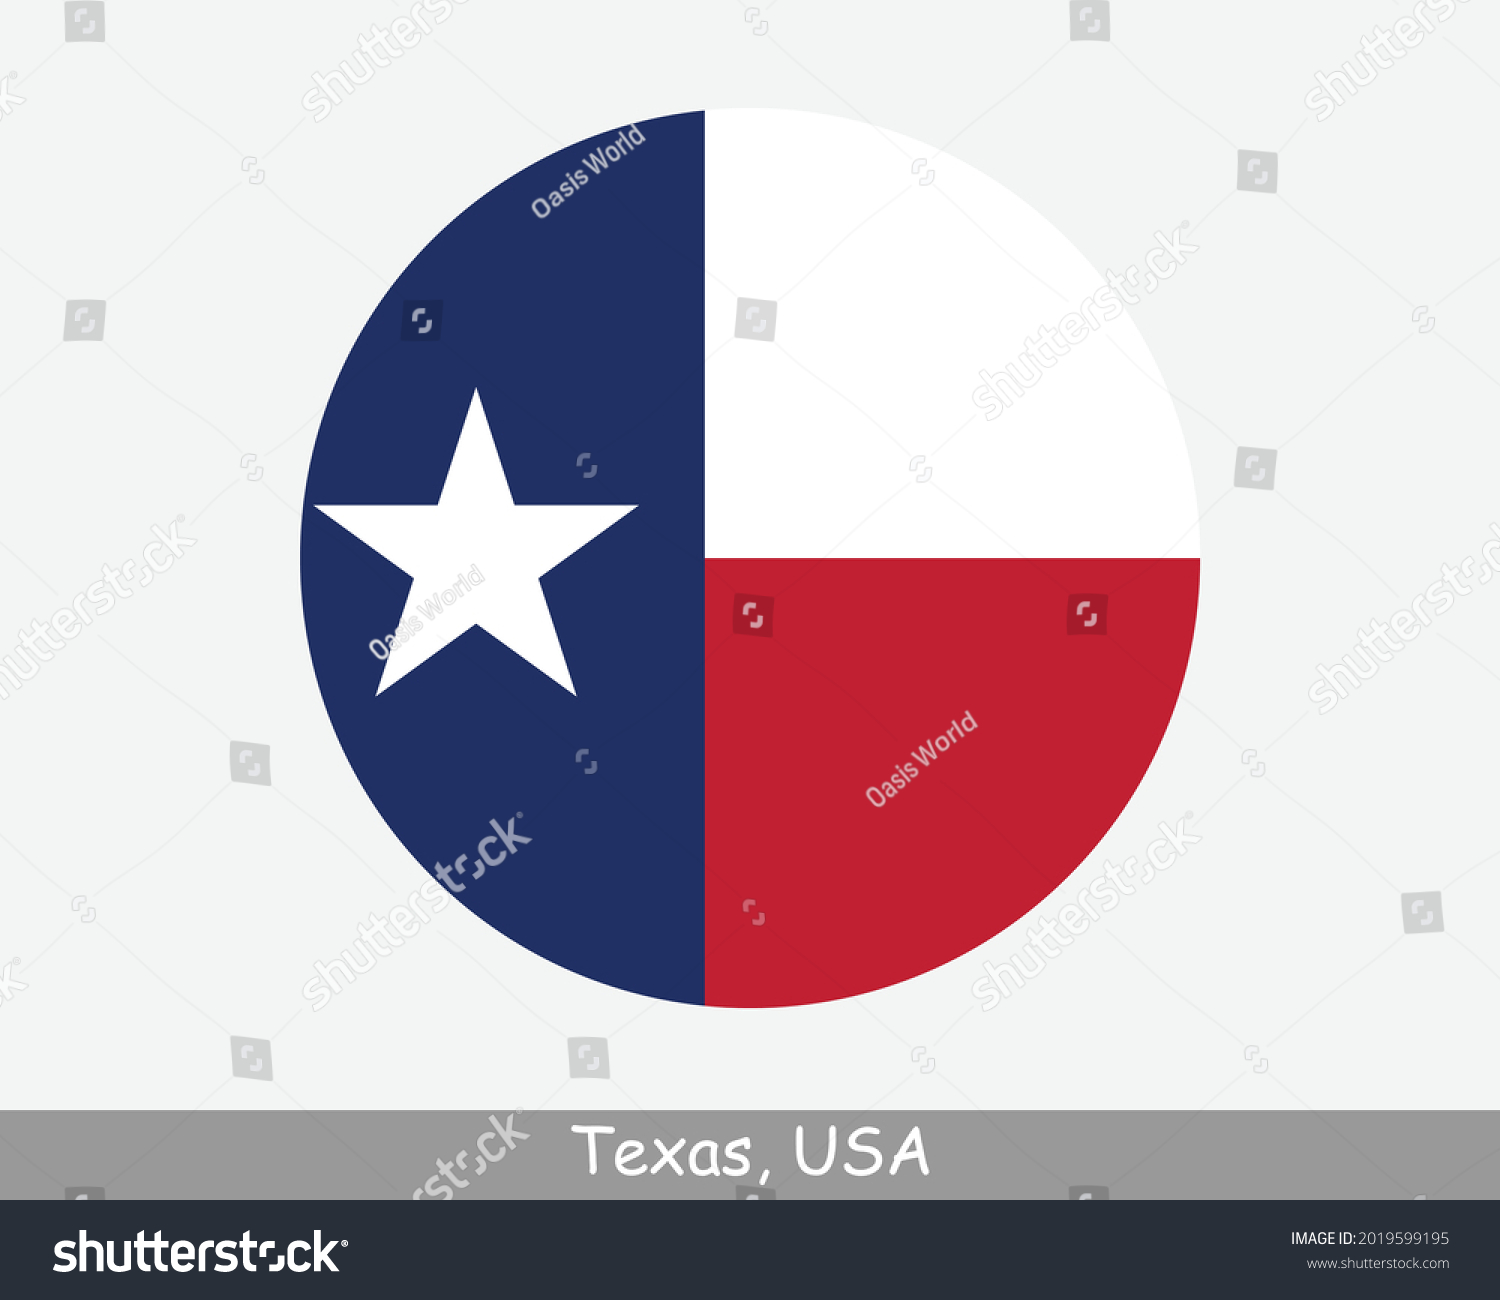 SVG of Texas Round Circle Flag. TX USA State Circular Button Banner Icon. Texas United States of America State Flag. The Lone Star State EPS Vector svg